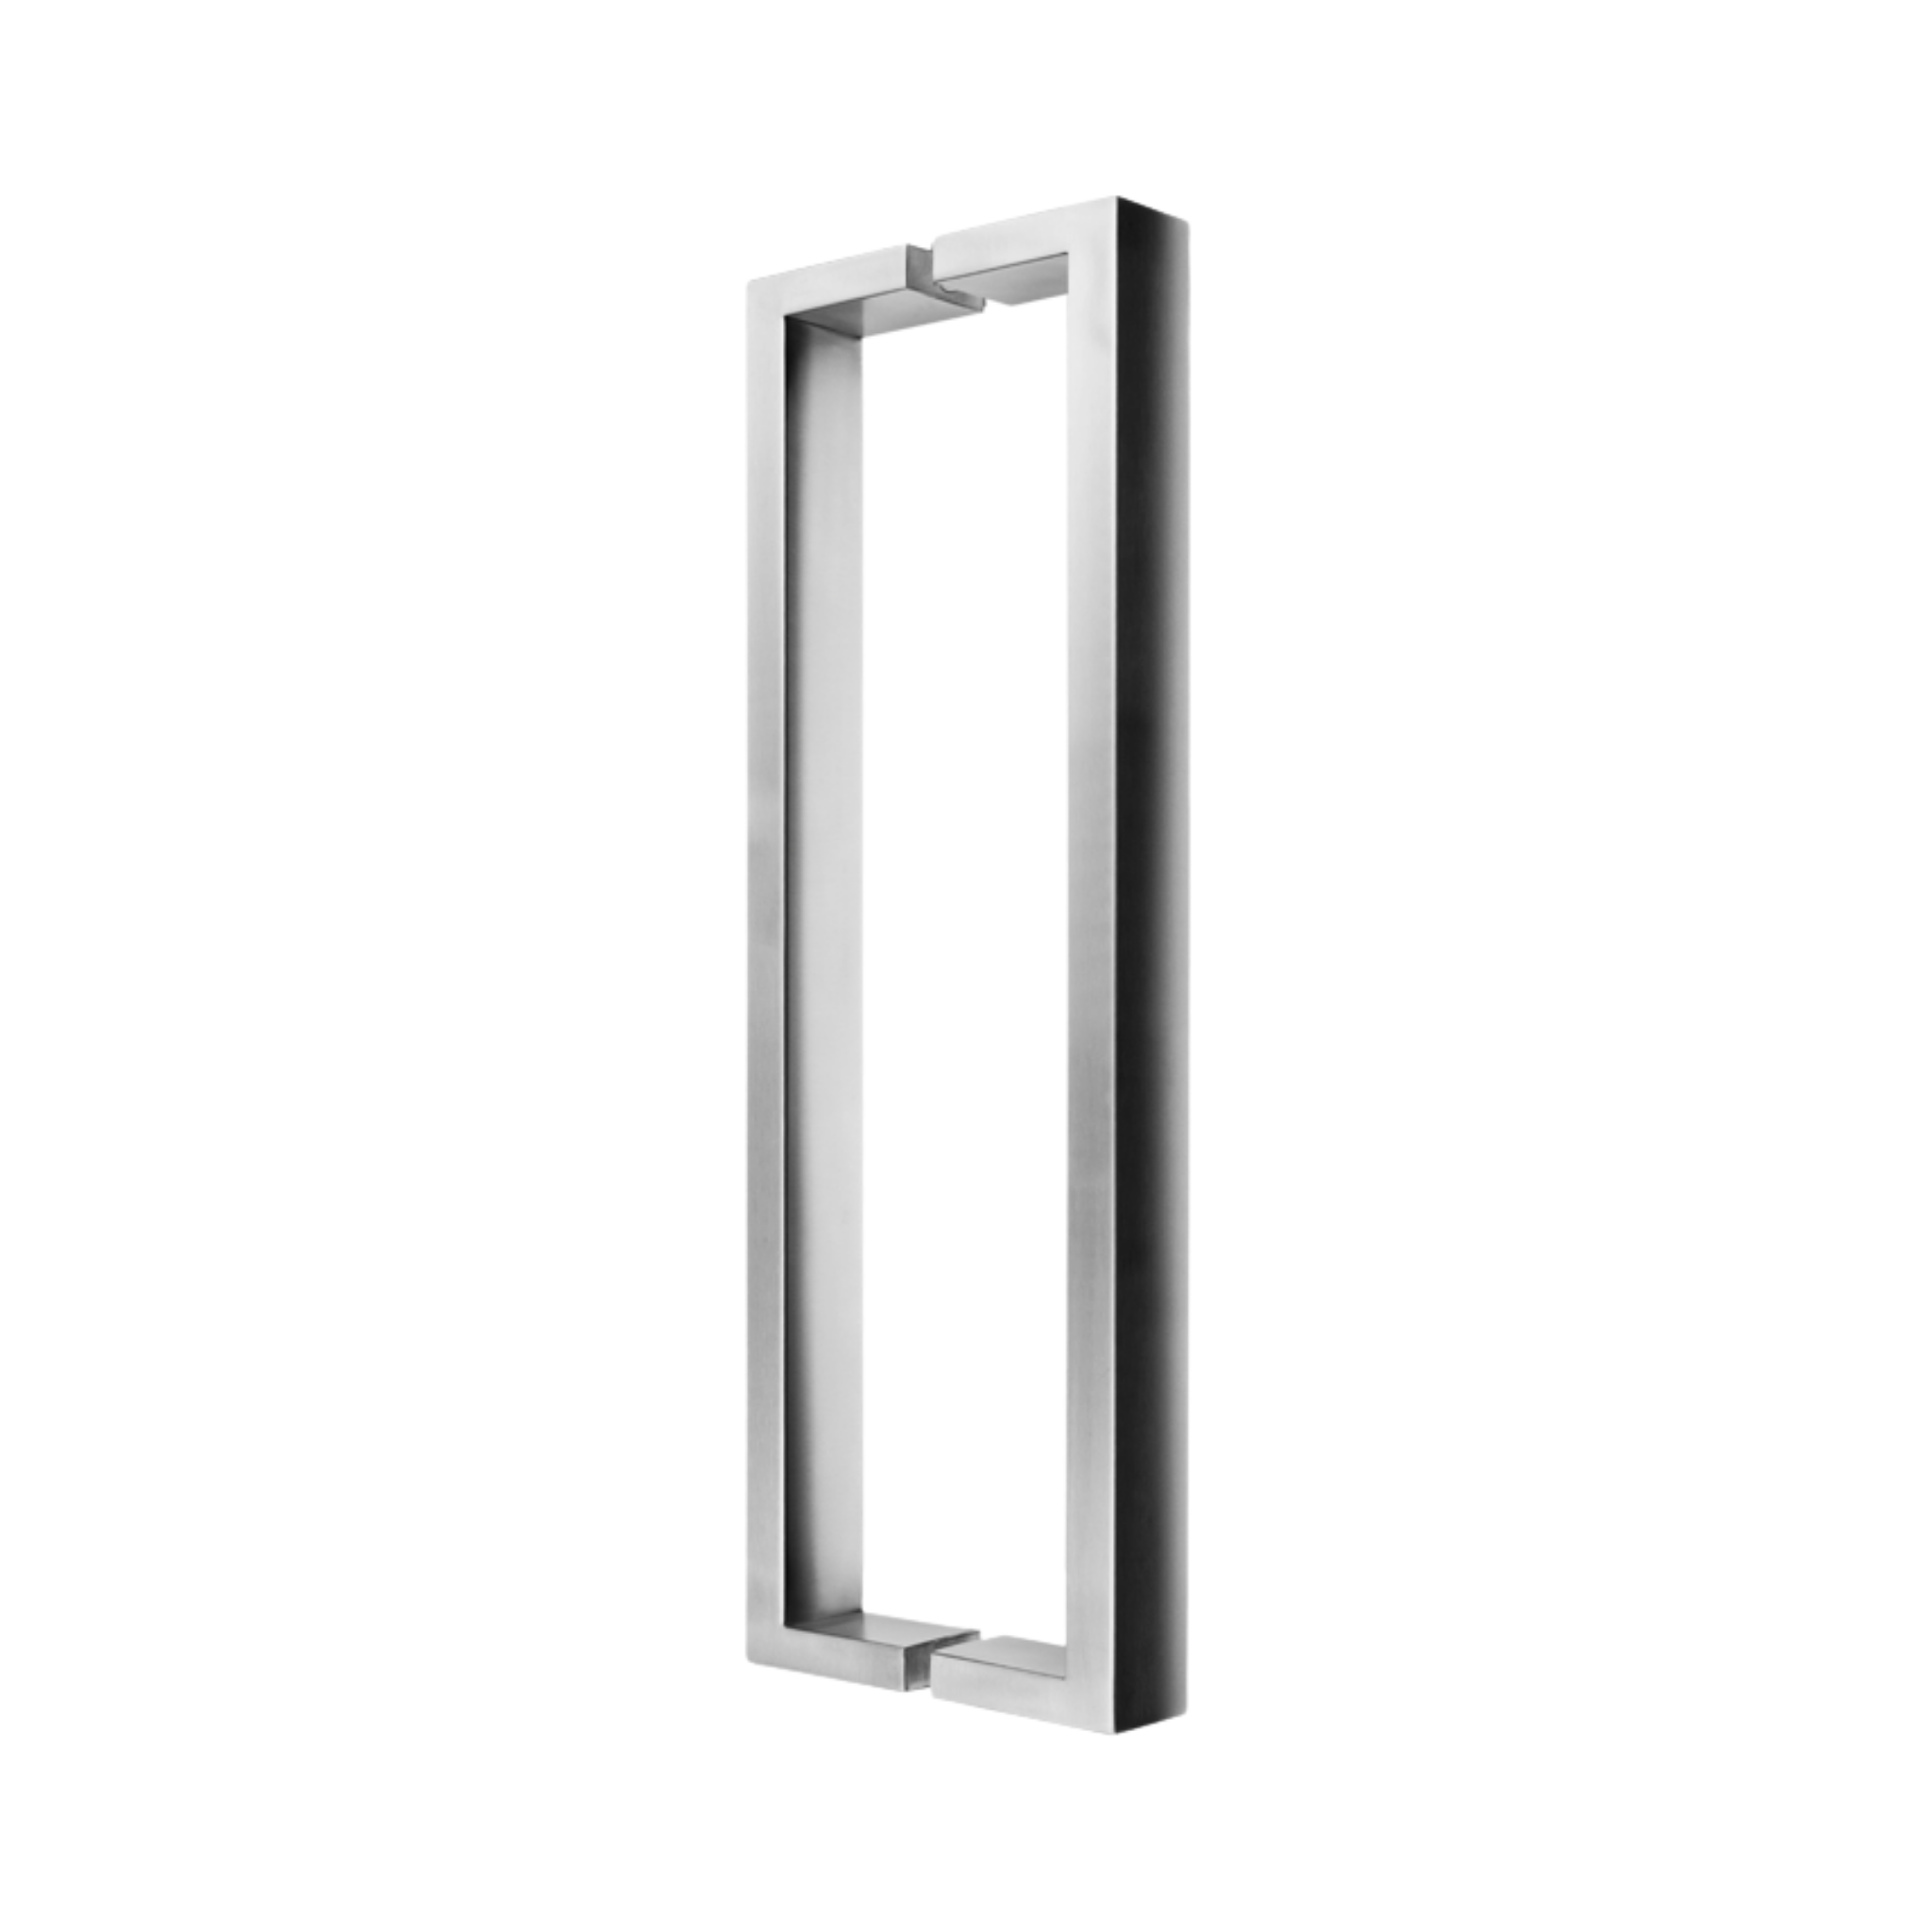 QS2620 Square D, Pull Handle, Square, Oblong, D Handle, BTB, 40x20mm (d) x 620mm (l) x 600mm (ctc), Stainless Steel, QS